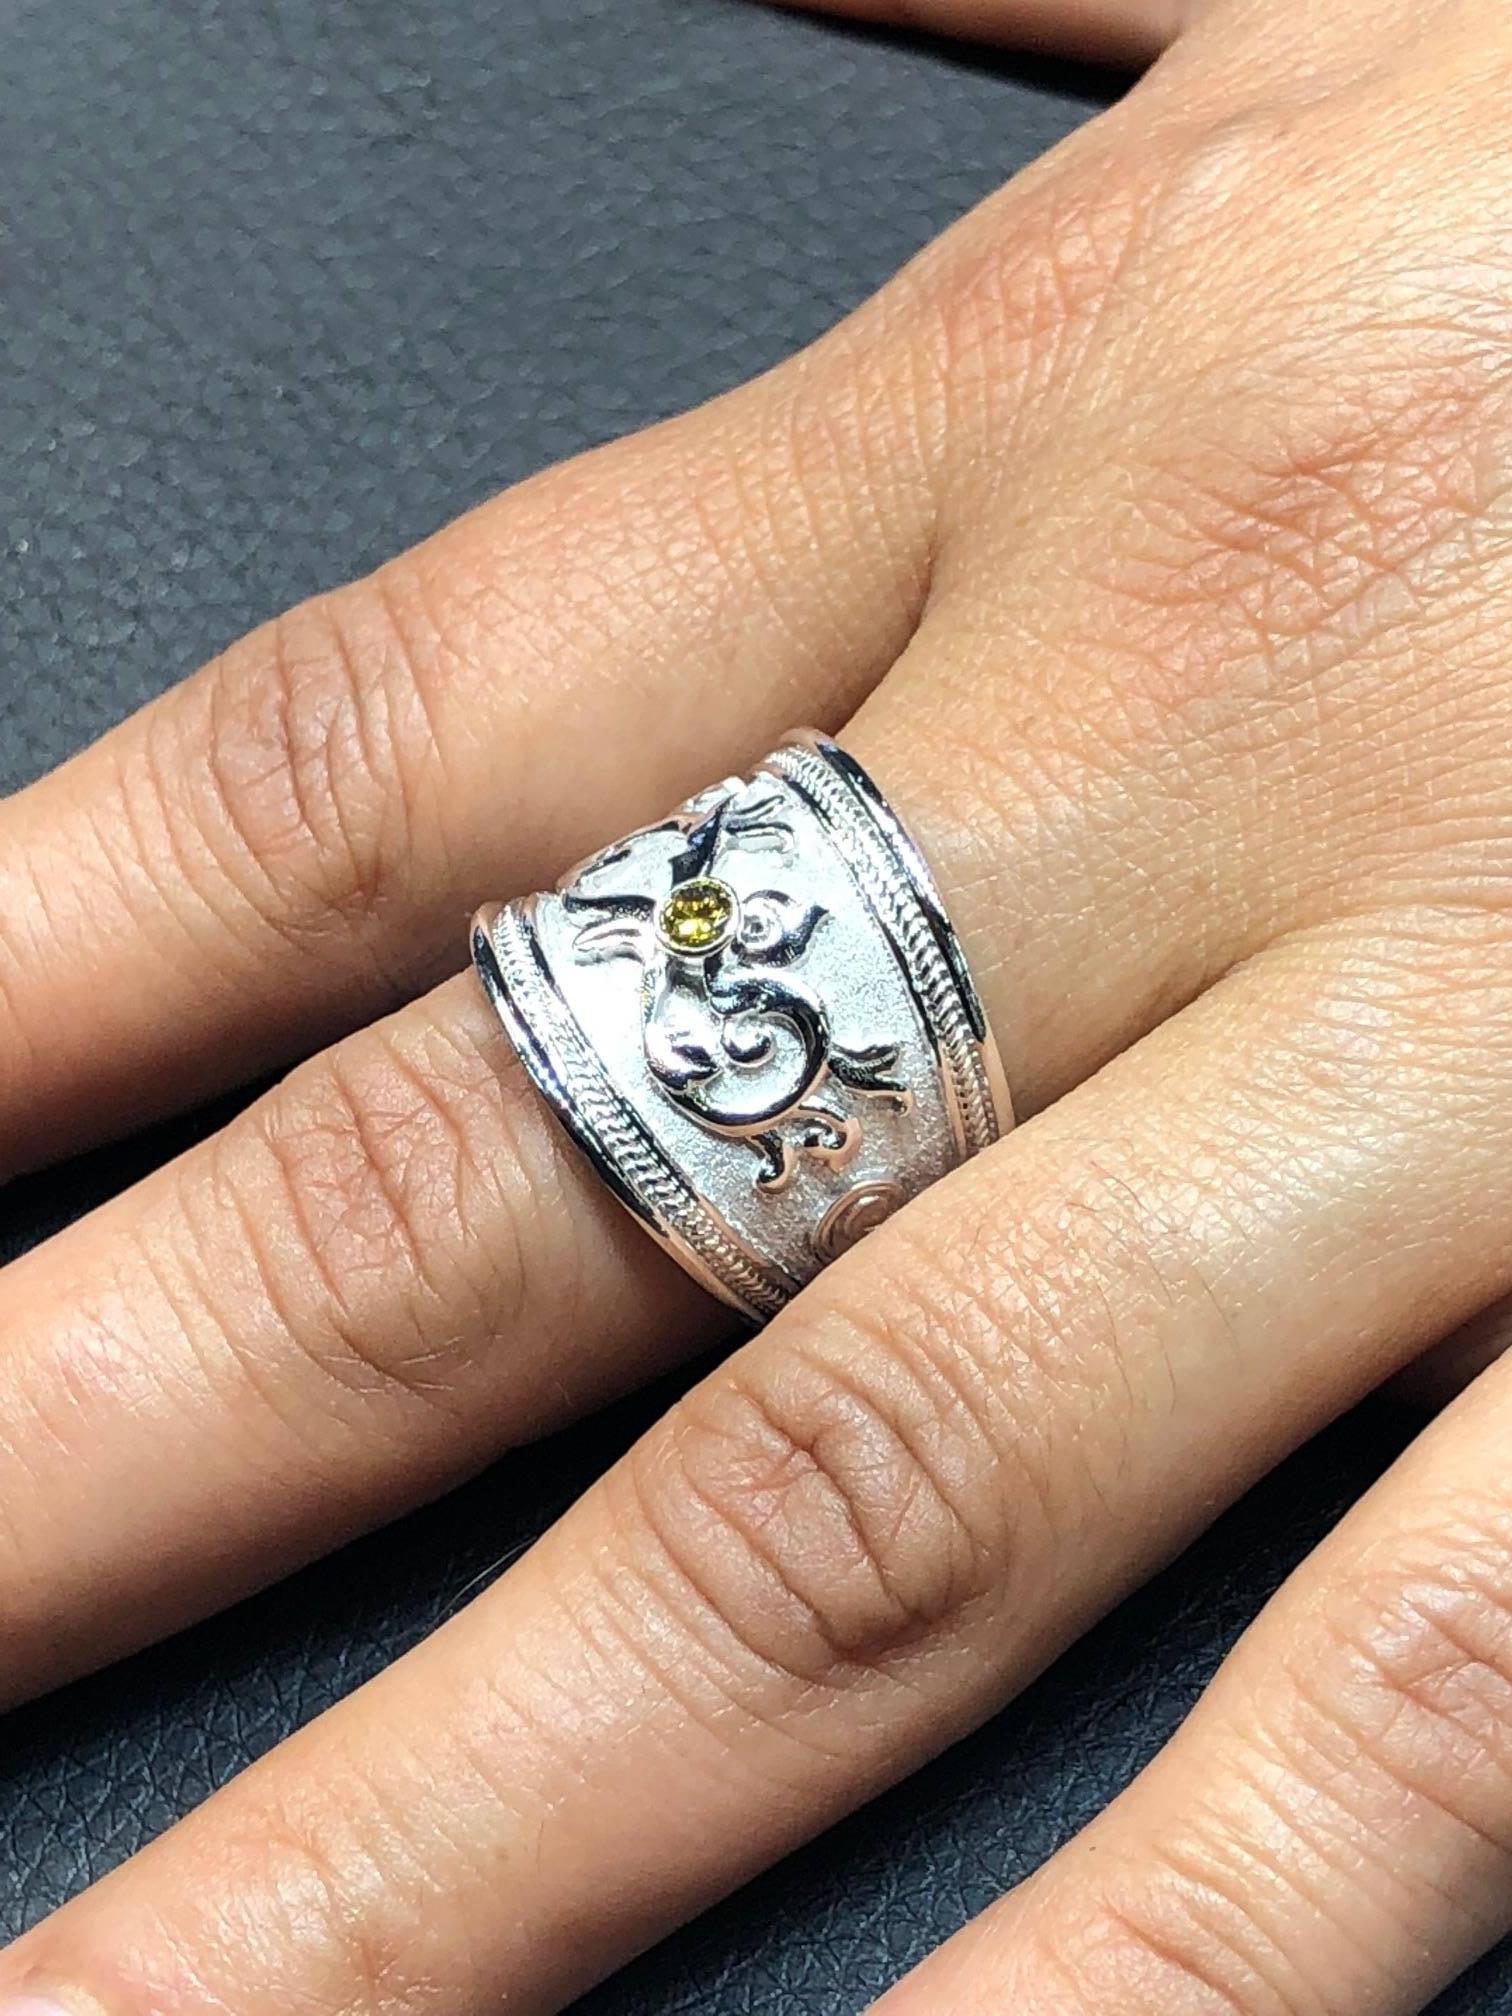 S.Georgios designer ring all handmade from solid 18 Karat White Gold. This Byzantine style ring is microscopically decorated - granulation work all the way around with white gold beads and wires shaped like the last letter of the Greek Alphabet -